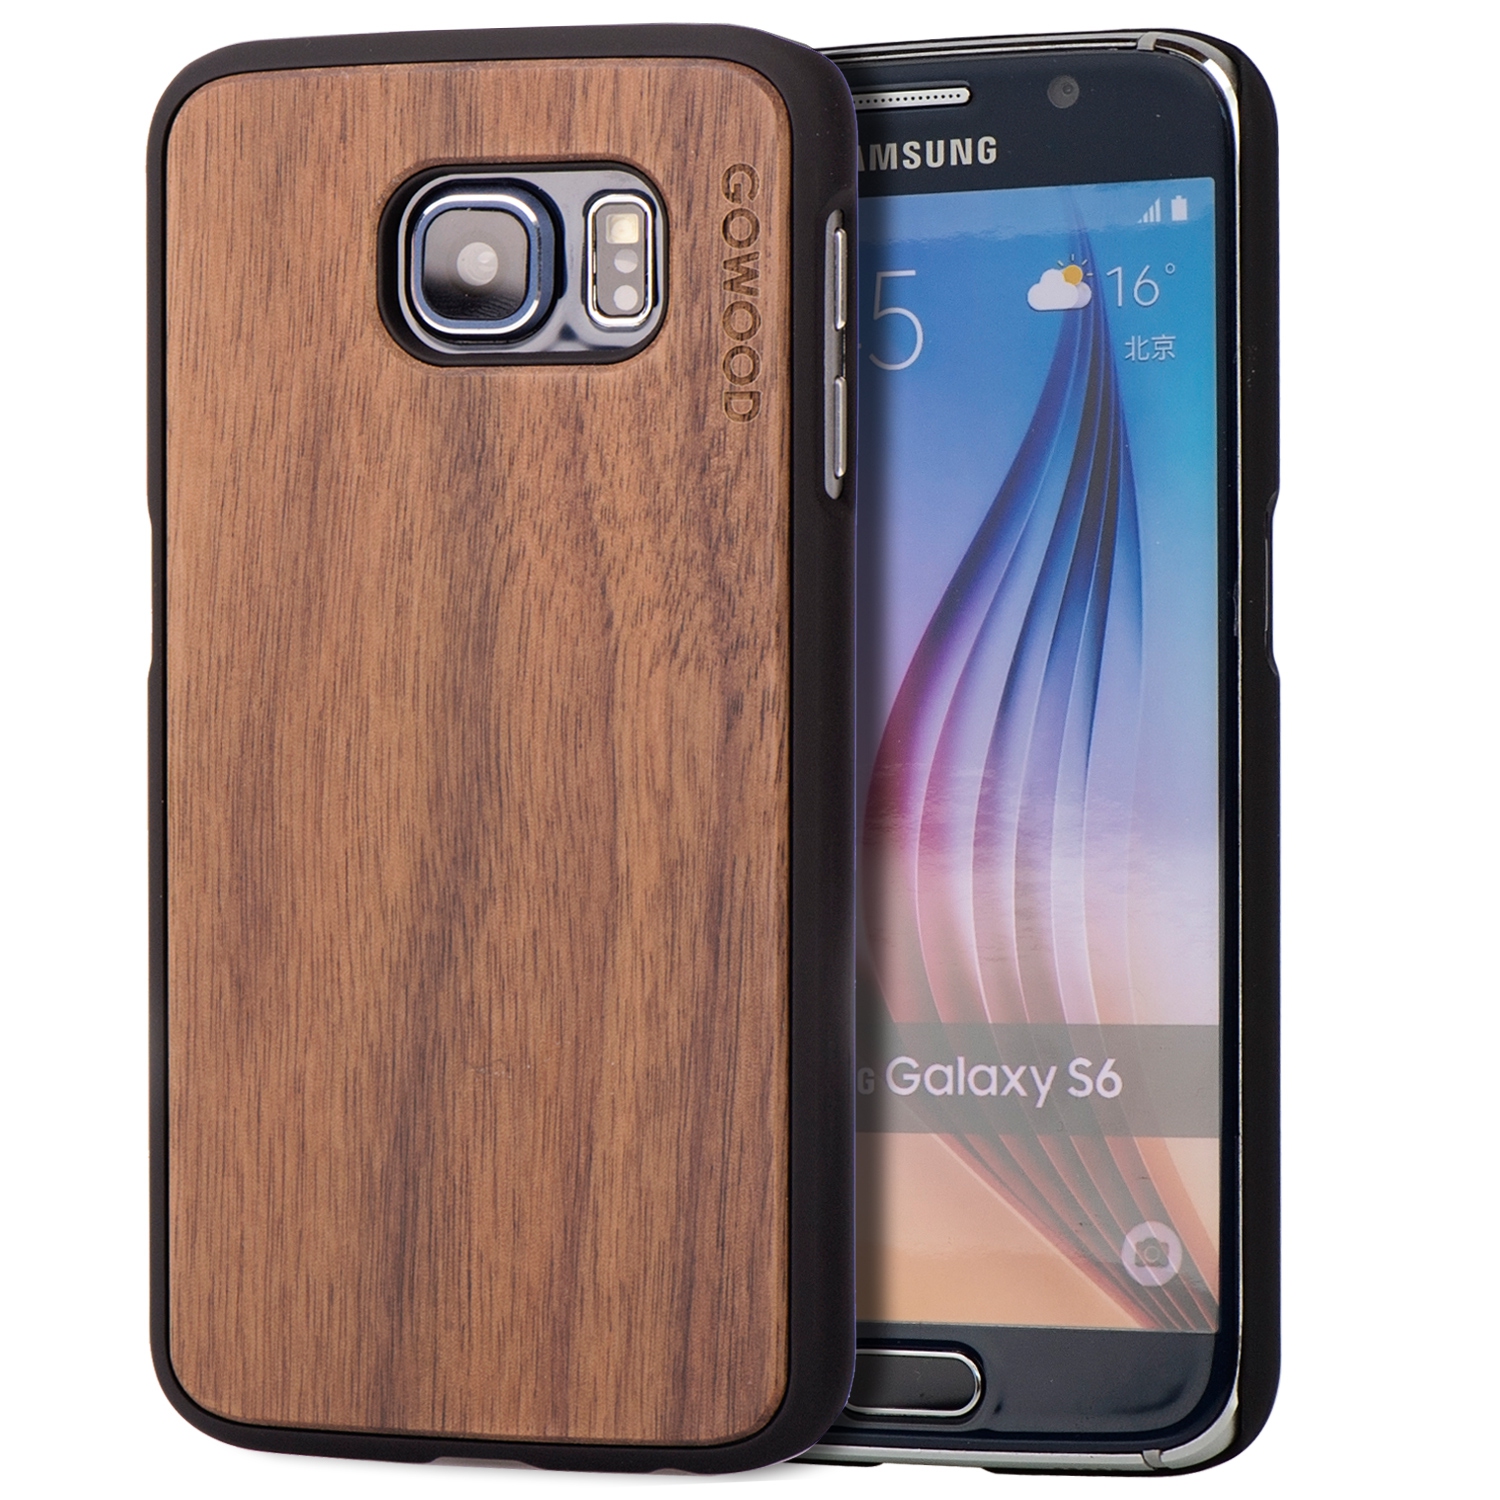 Samsung Galaxy S6 Wood Case | Real Walnut Backside and Durable Polycarbonate Shockproof Bumper with Rubber Coating